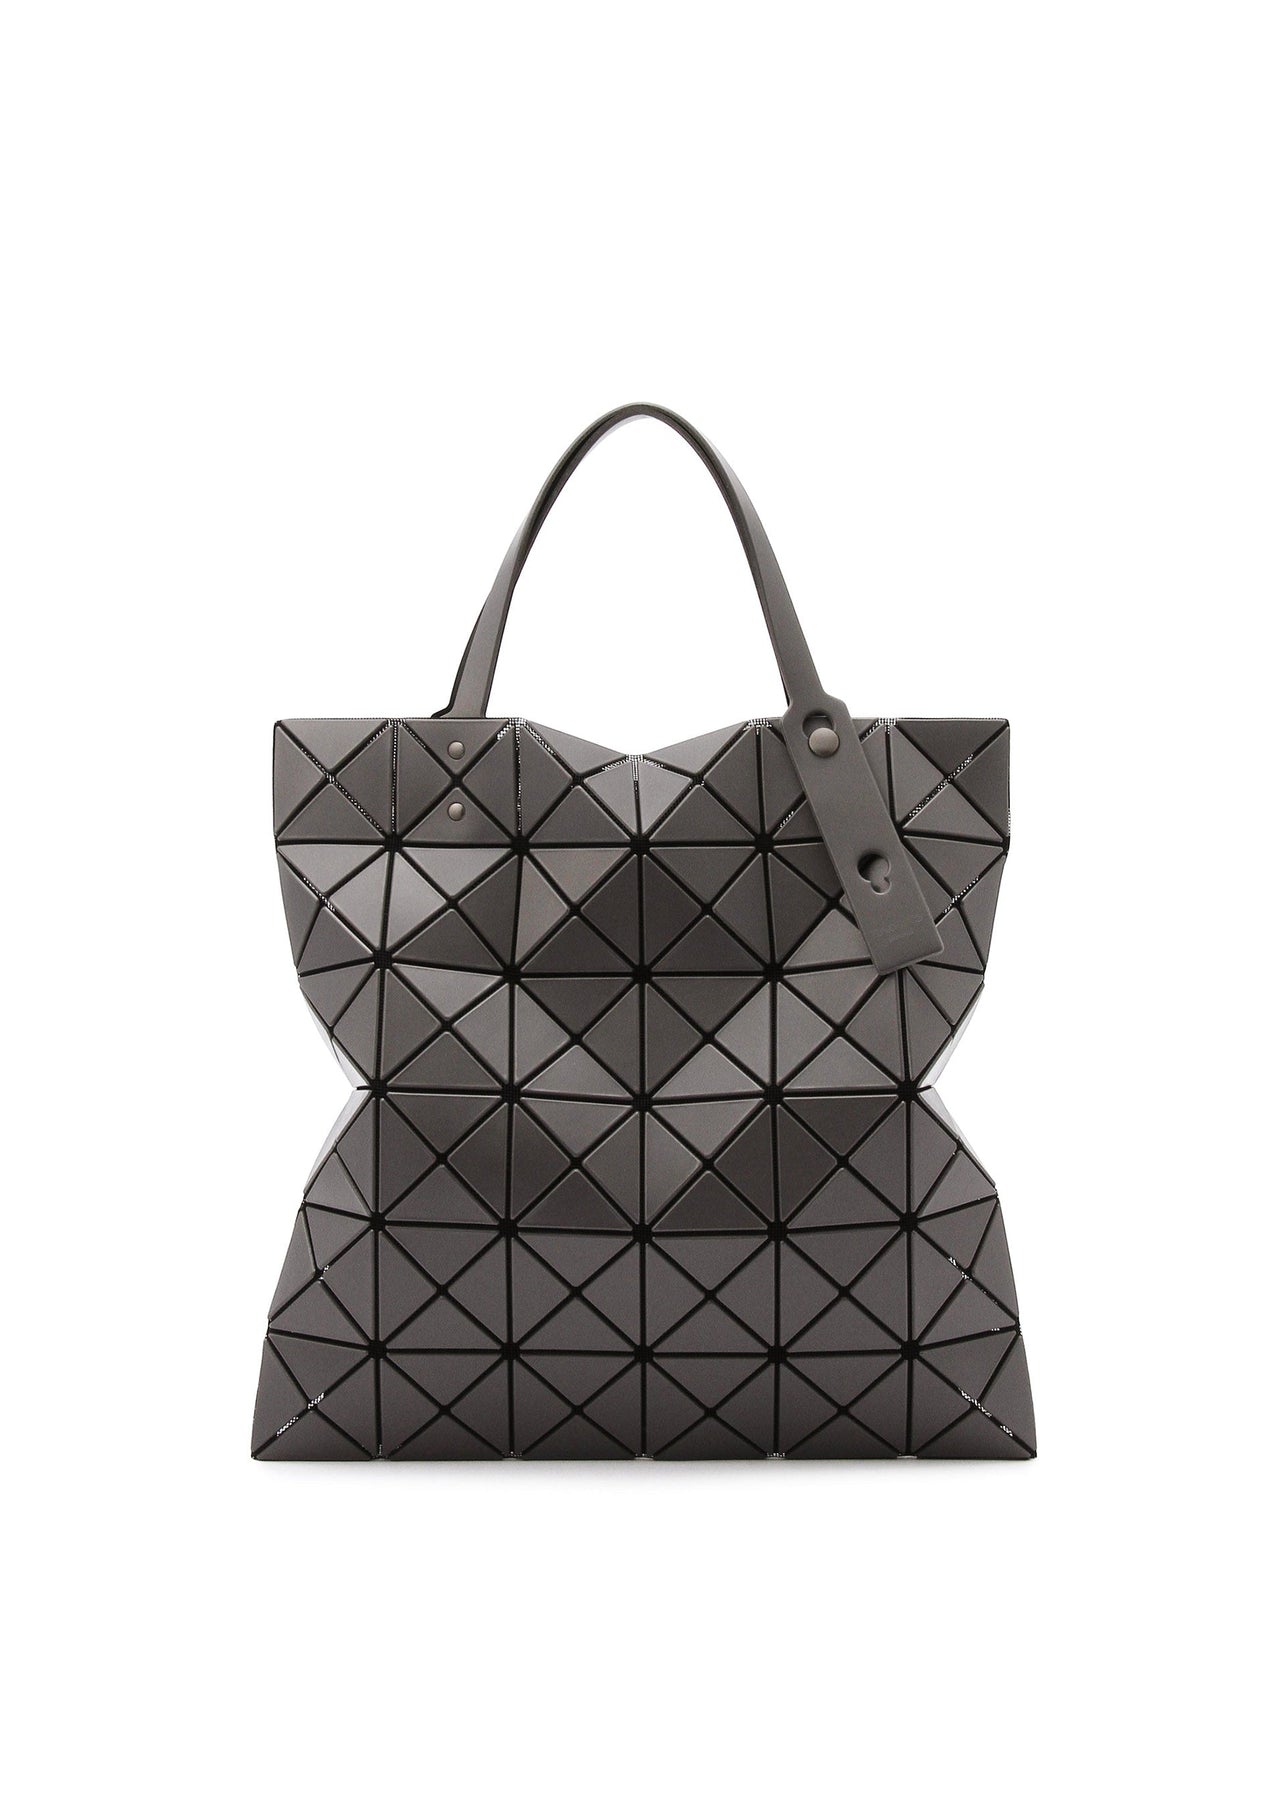 100% AUTHENTIC BAO BAO ISSEY MIYAKE LUCENT BEIGE COLOR TOTE BAG